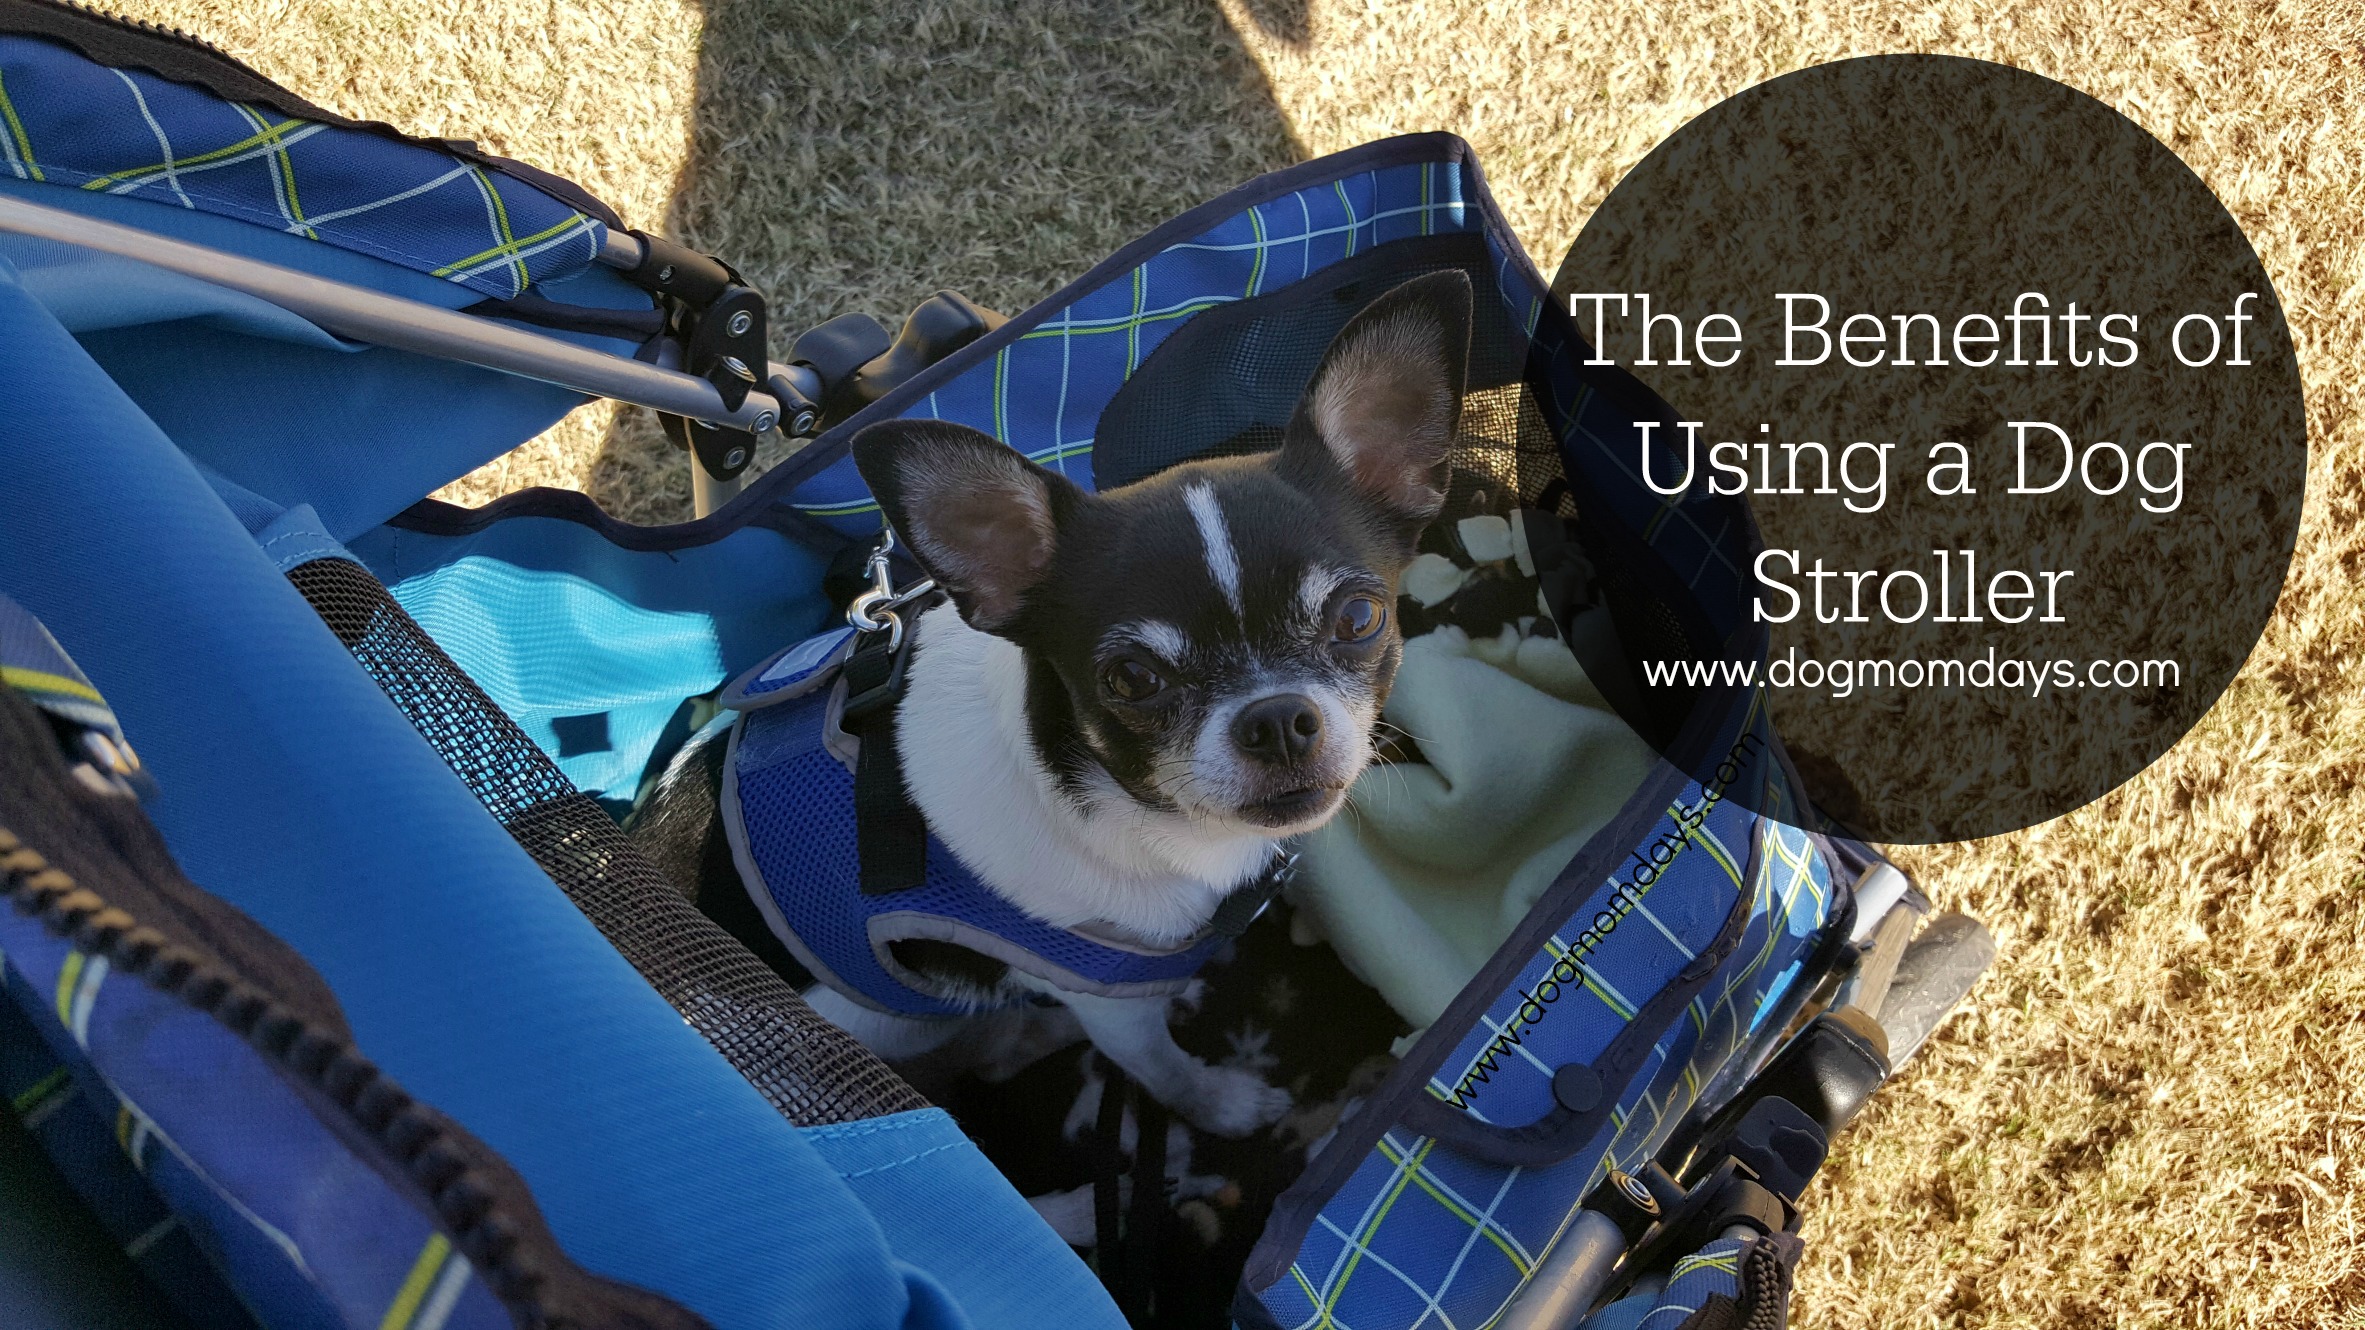 The benefits of using a dog stroller